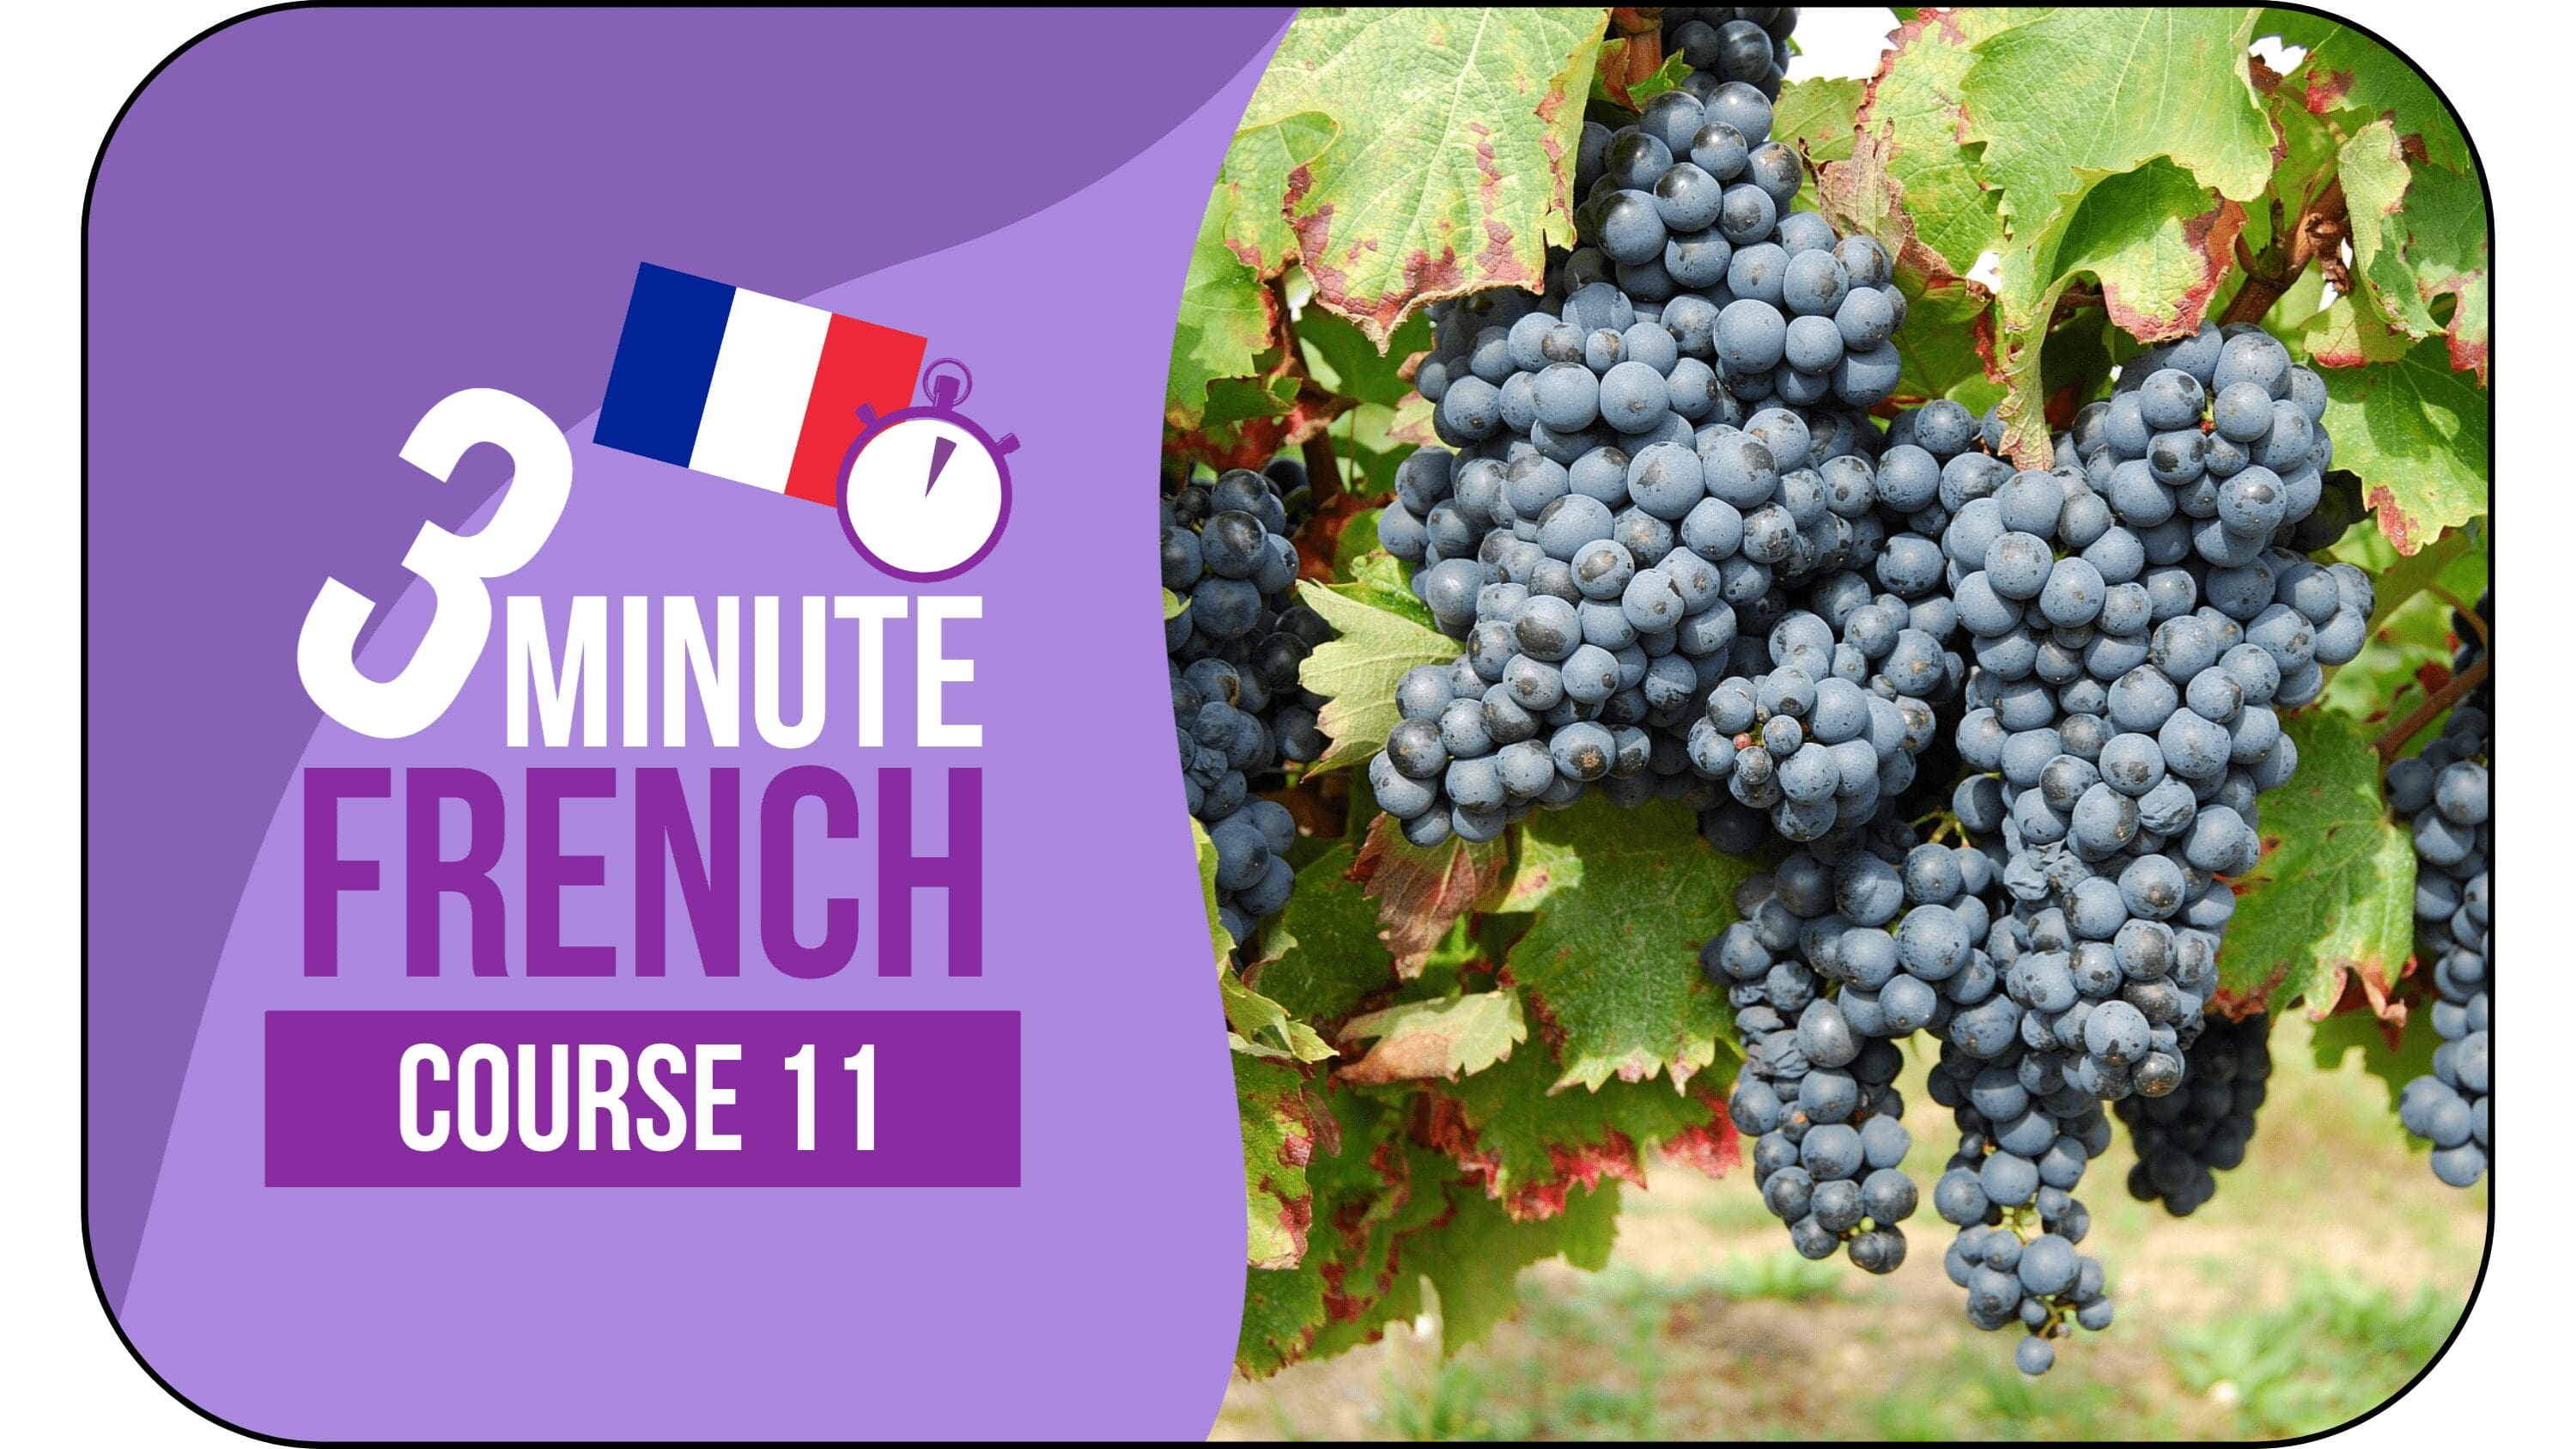 3 Minute French - Course 11